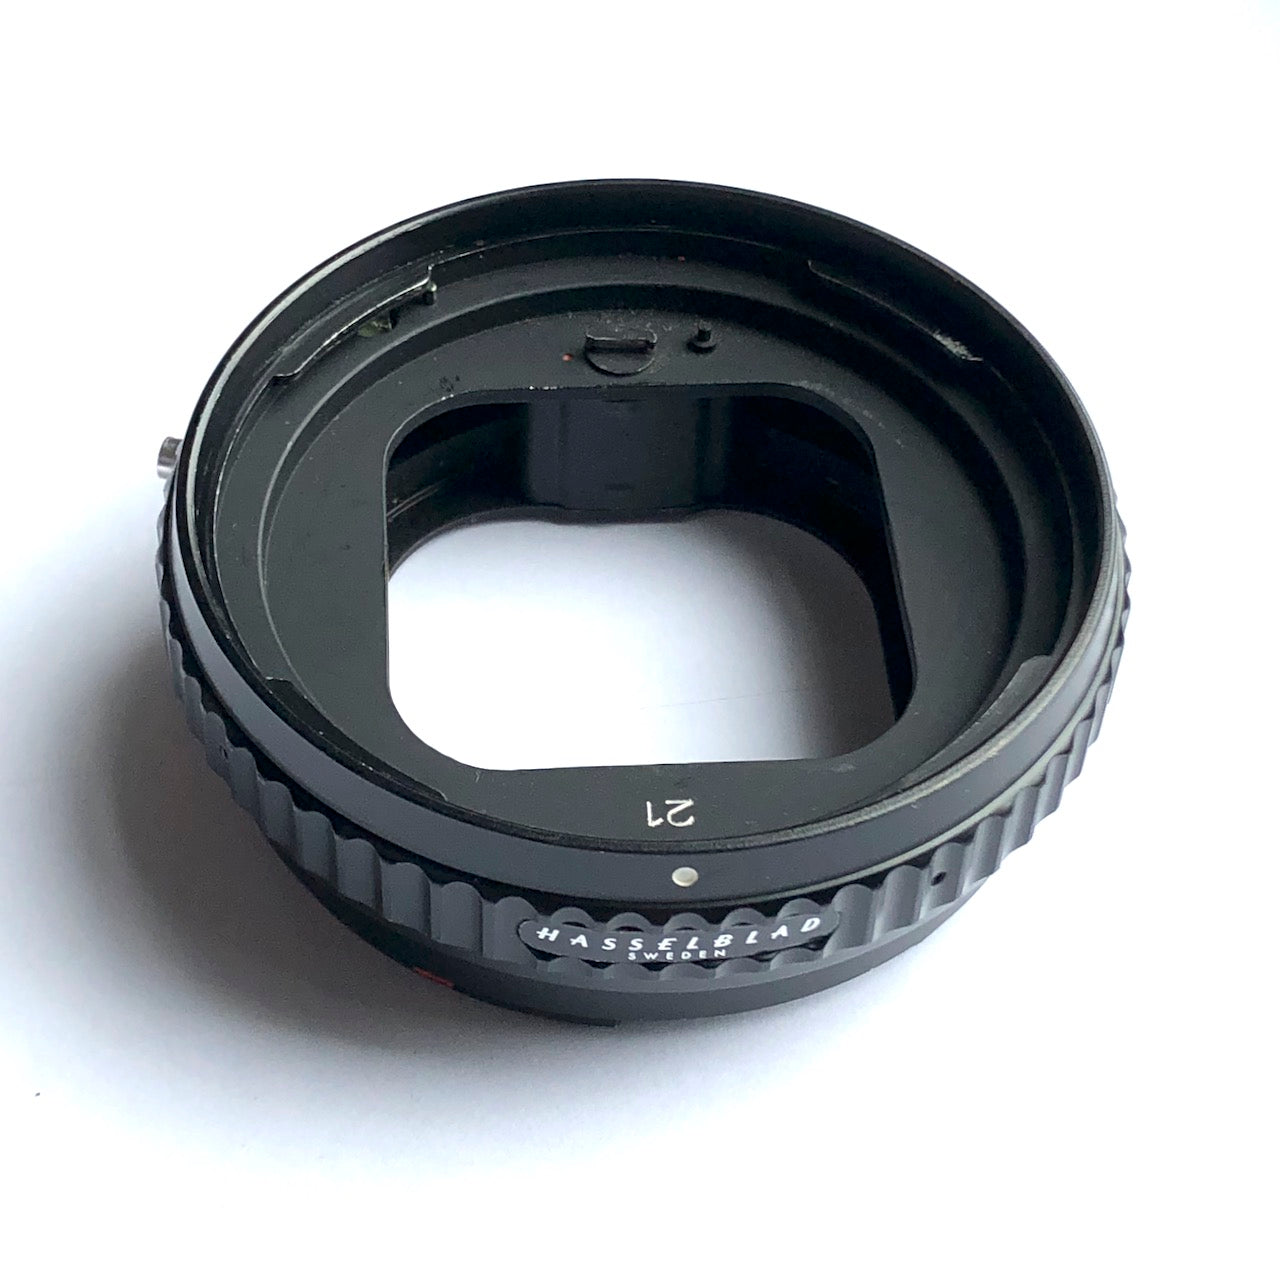 Hasselblad 21mm extension tube